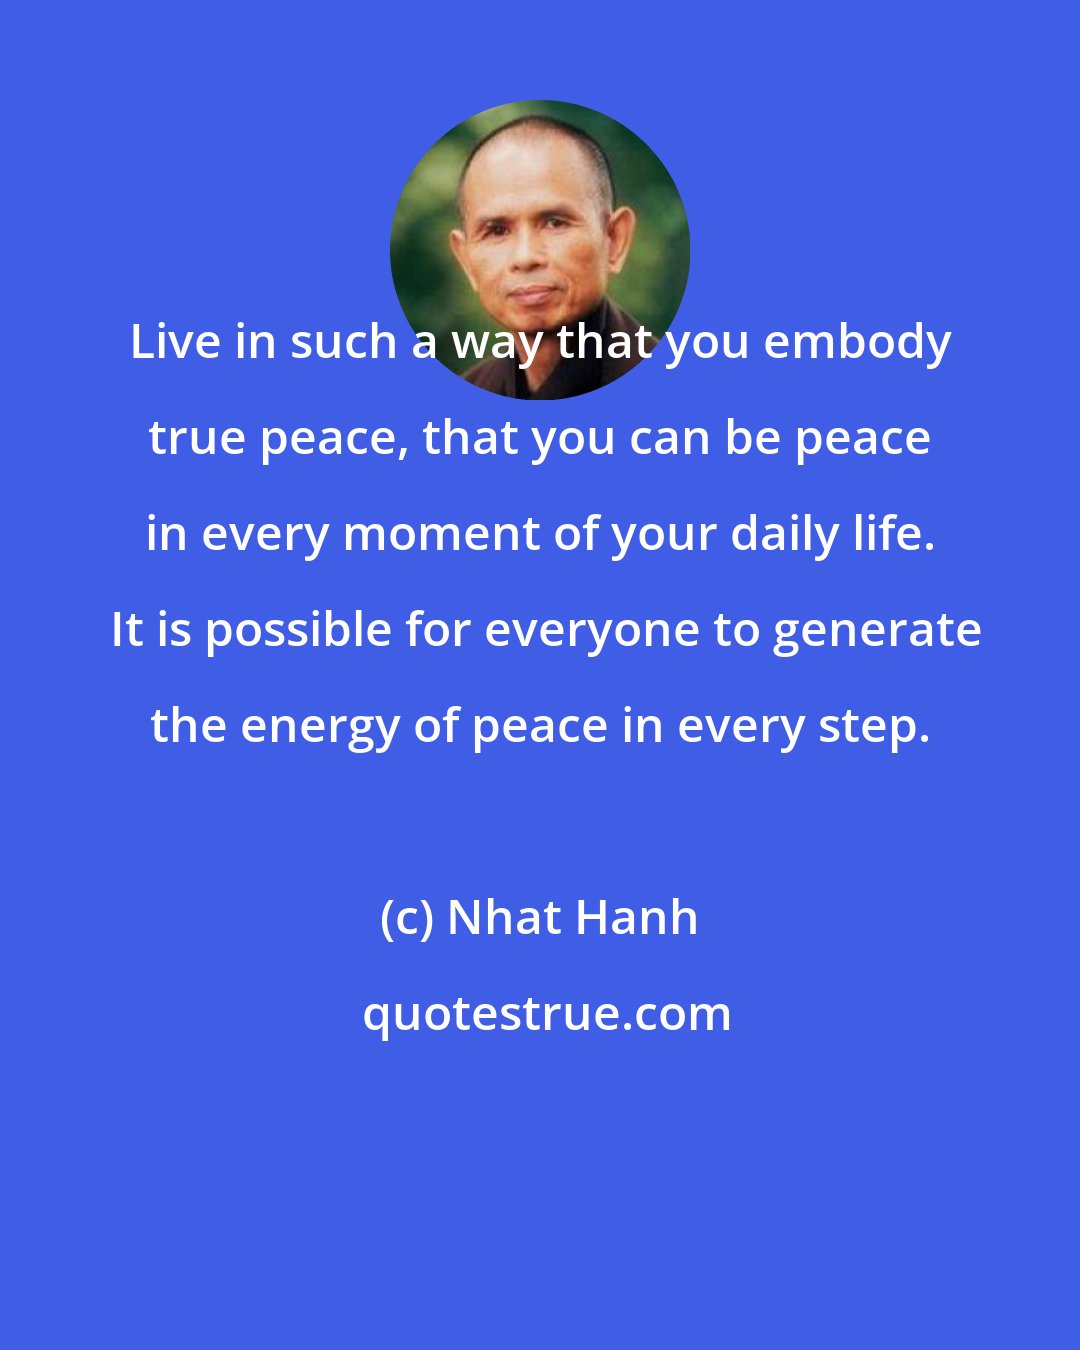 Nhat Hanh: Live in such a way that you embody true peace, that you can be peace in every moment of your daily life.  It is possible for everyone to generate the energy of peace in every step.